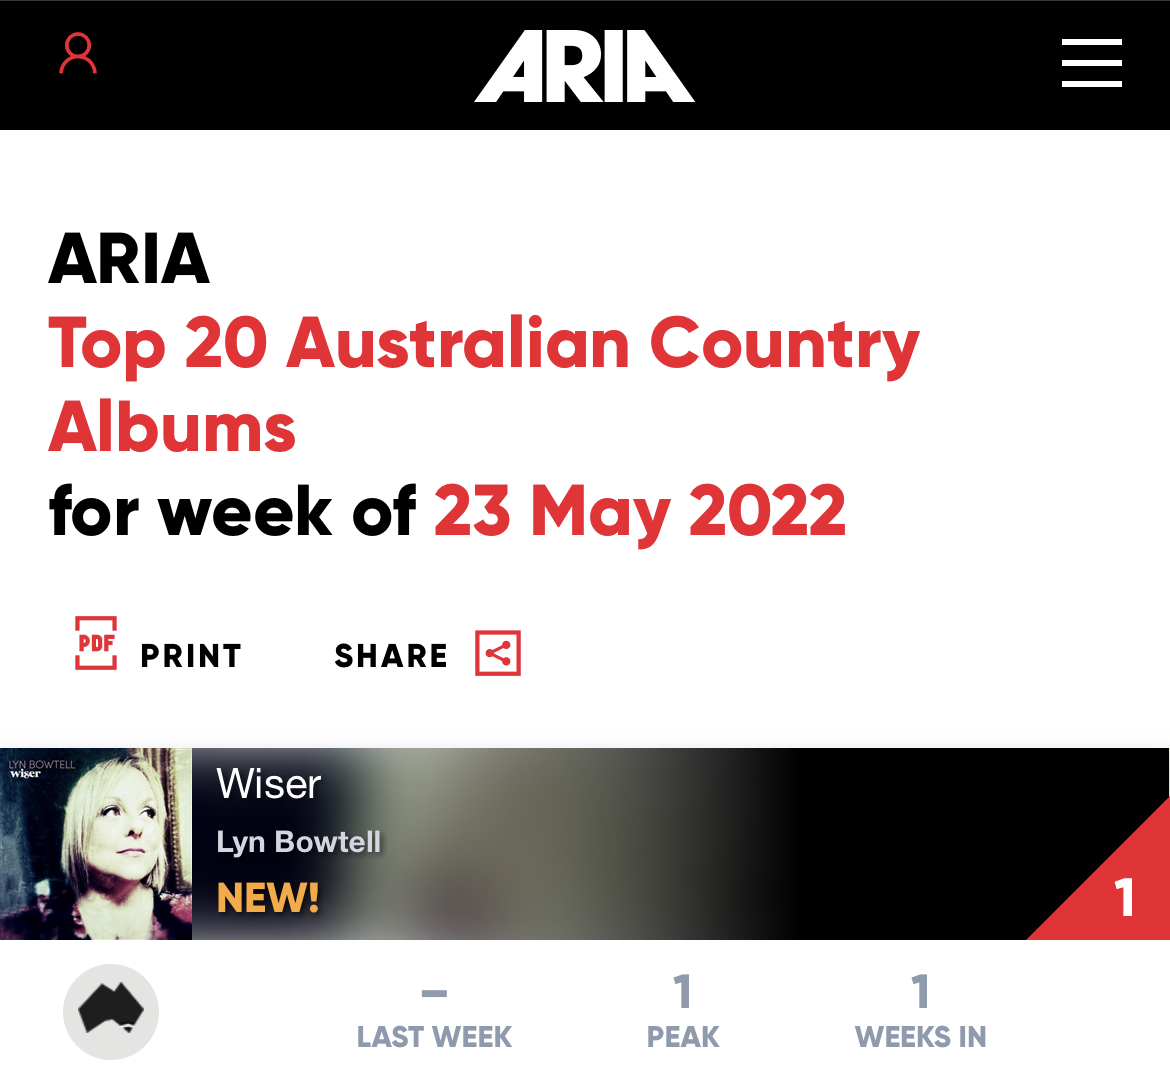 ‘Wiser’ is #1 on ARIA Top 20!